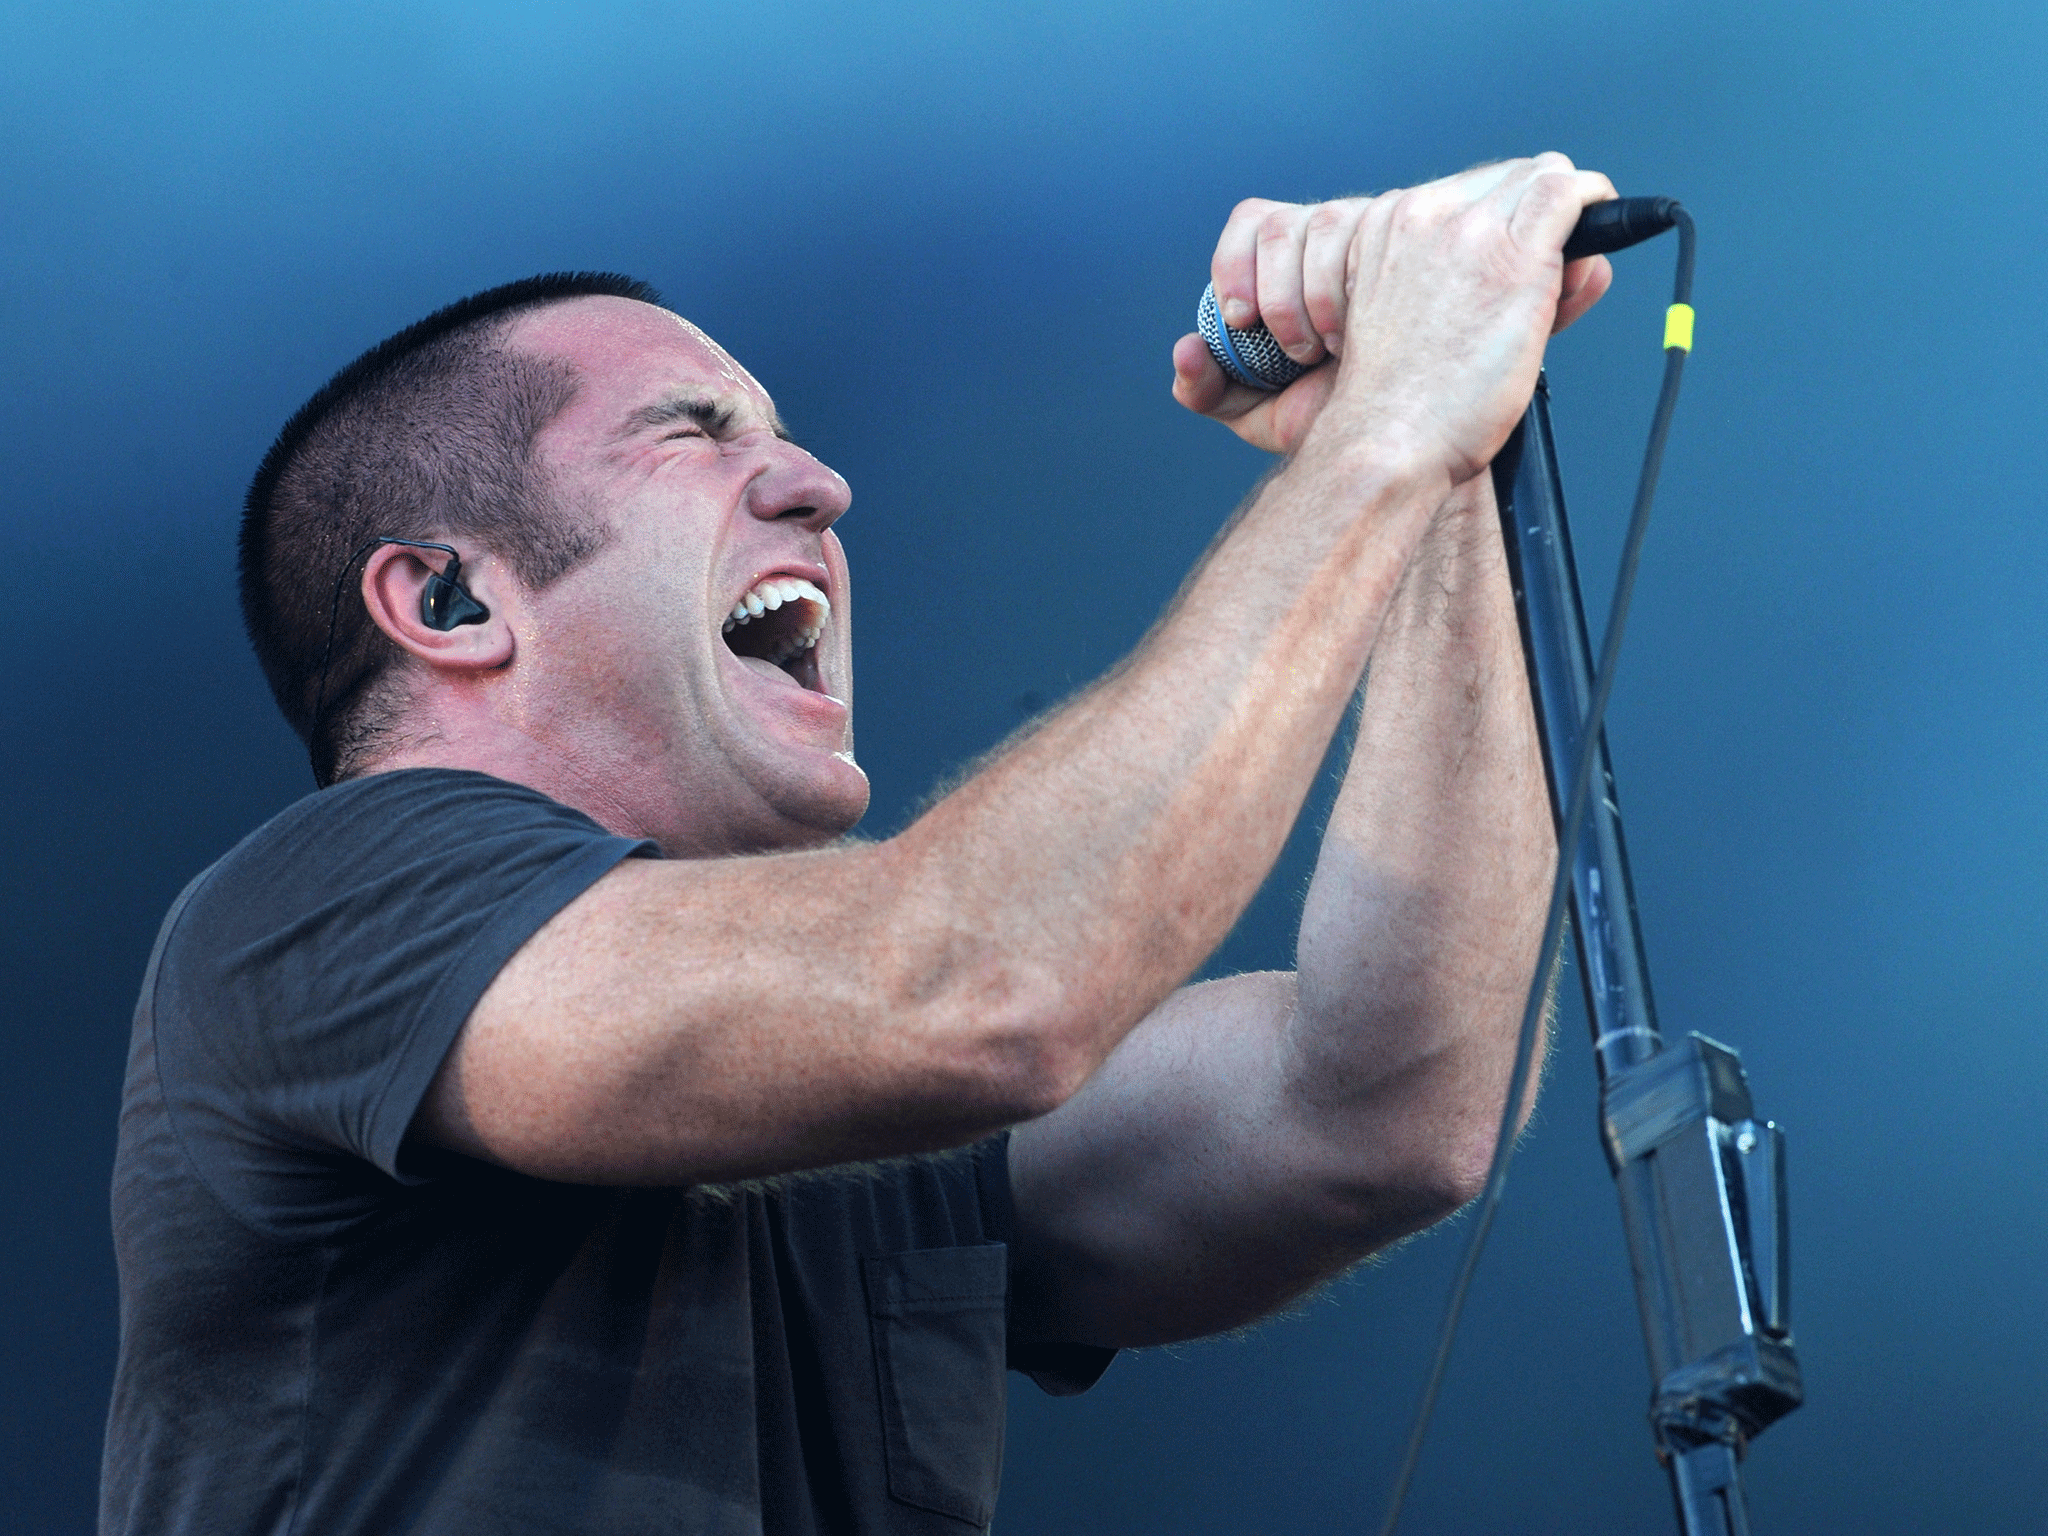 Nine Inch Nails O2 Arena Gig Review Steeped In Nostalgic Appeal And Musical Ferocity The